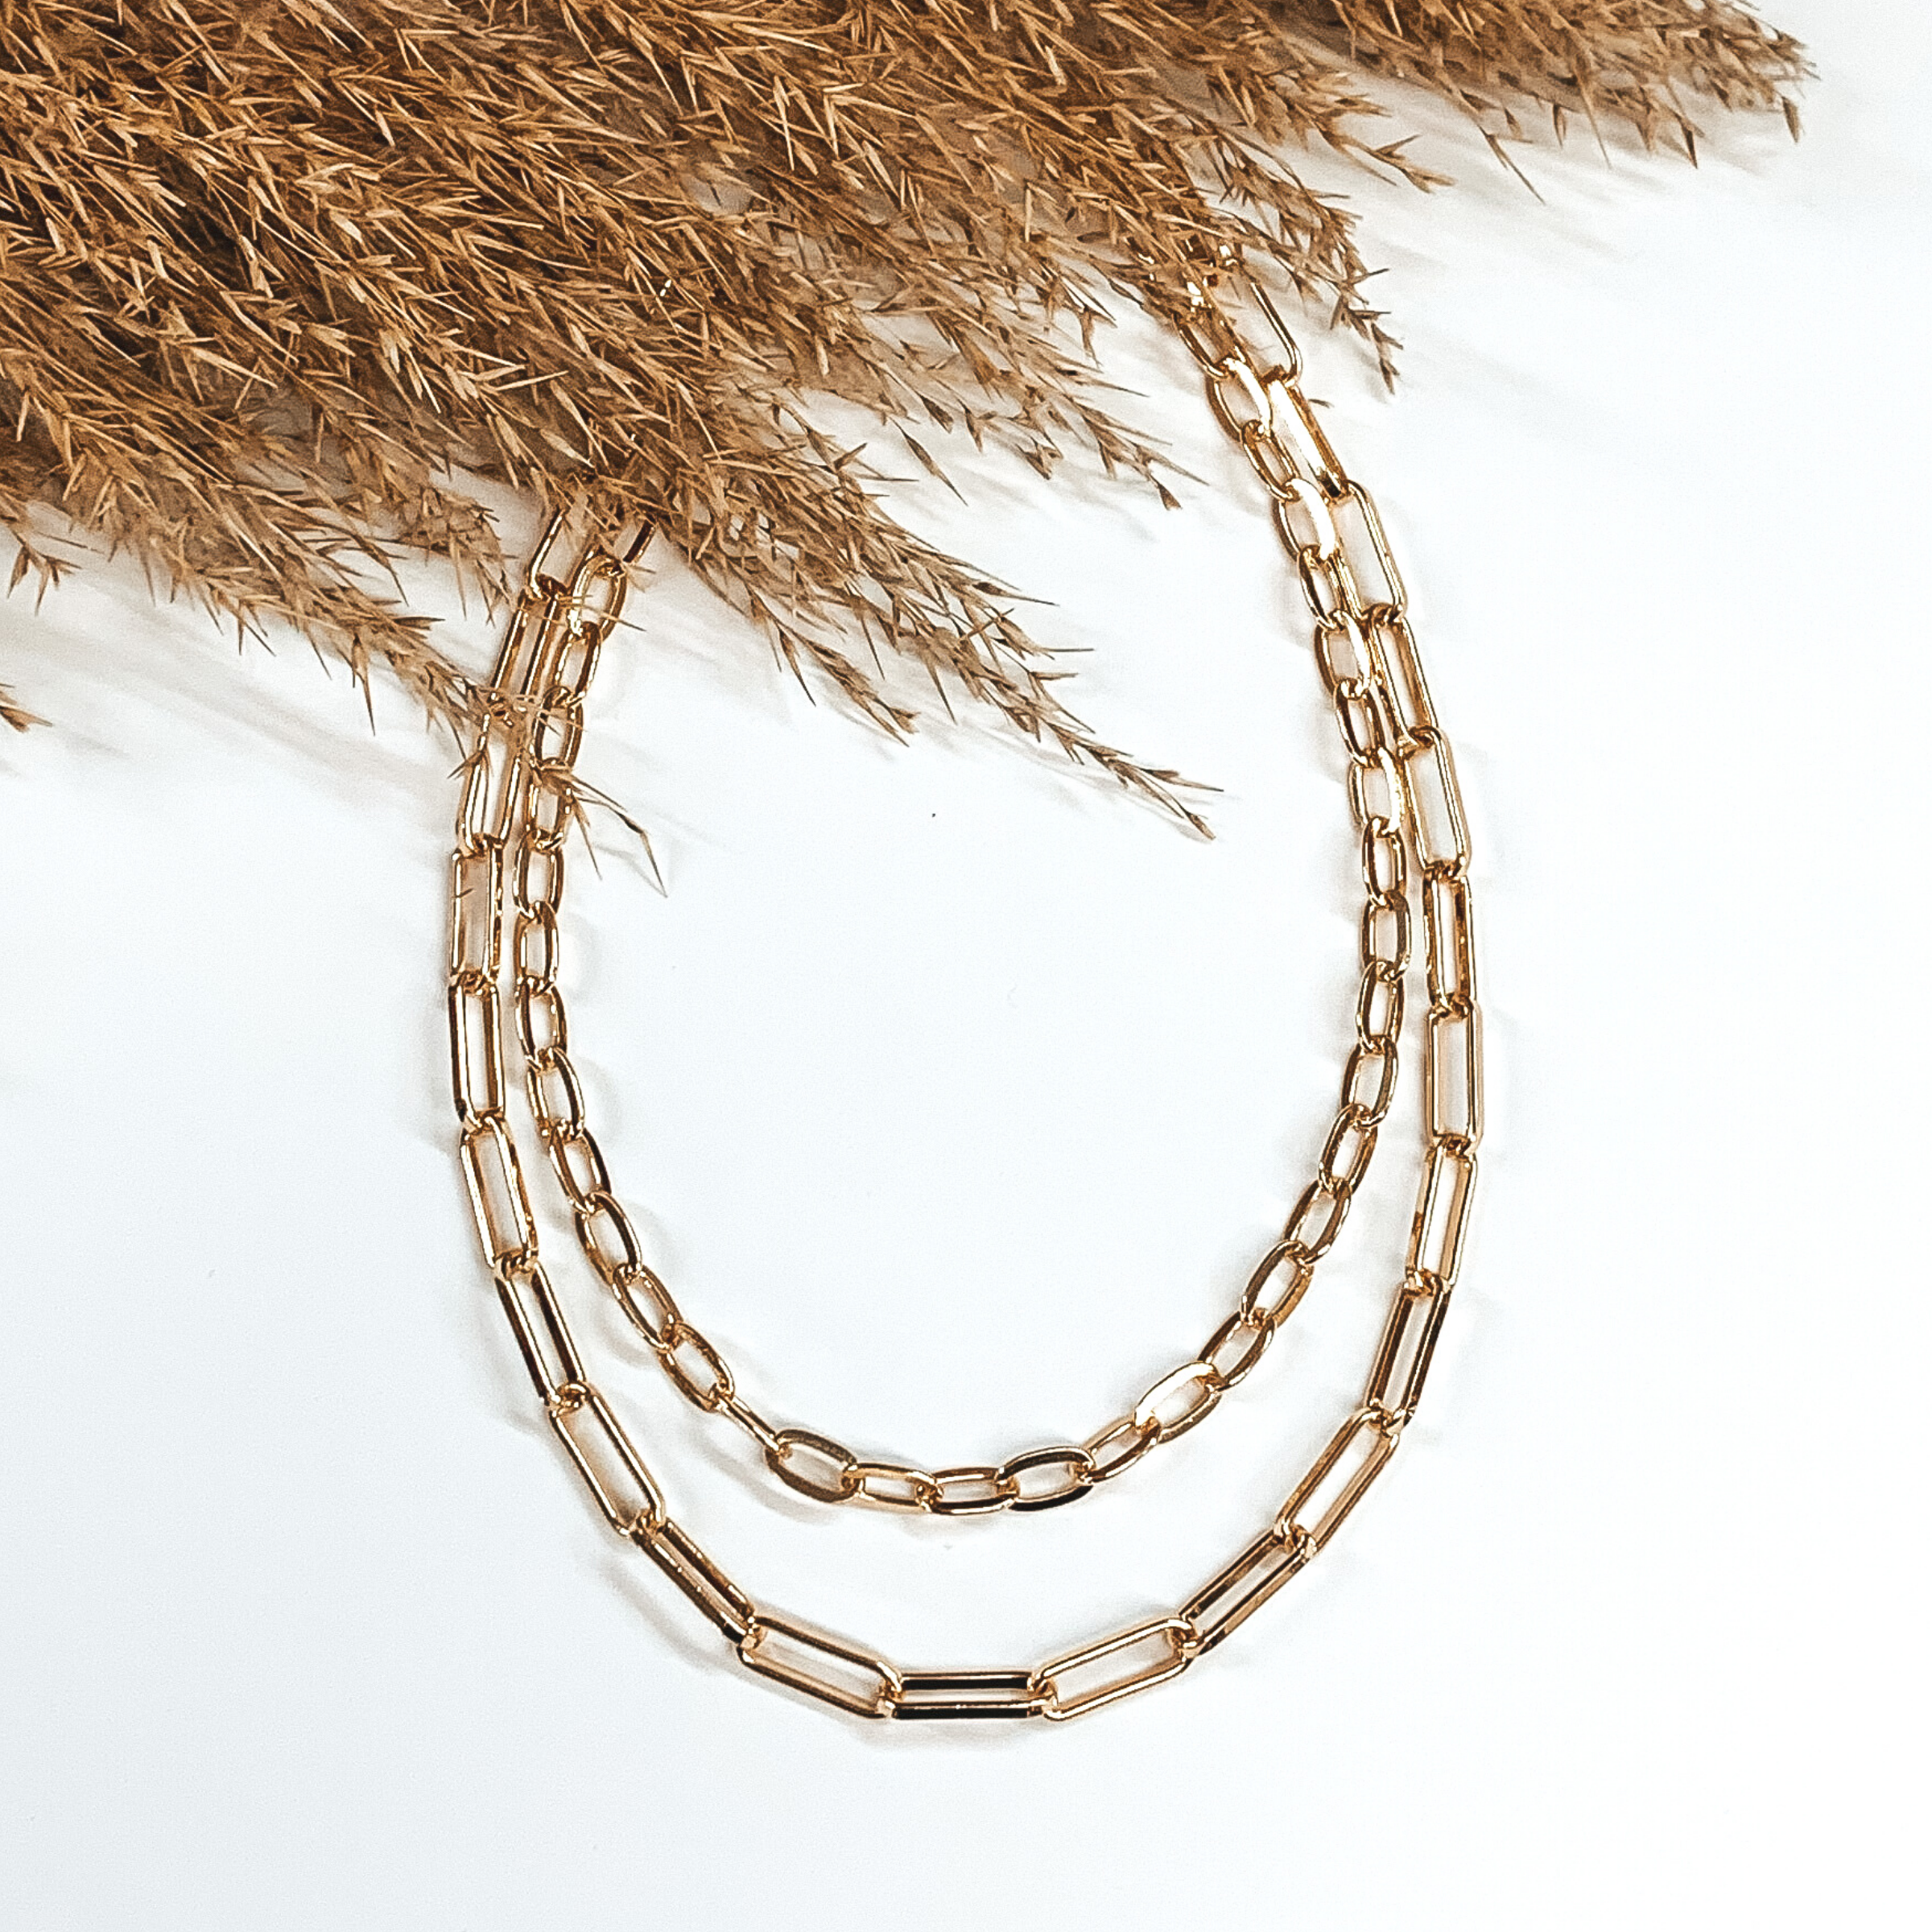 Double layered gold chain necklace. This necklace is pictured on a white background with tan floral at the top.